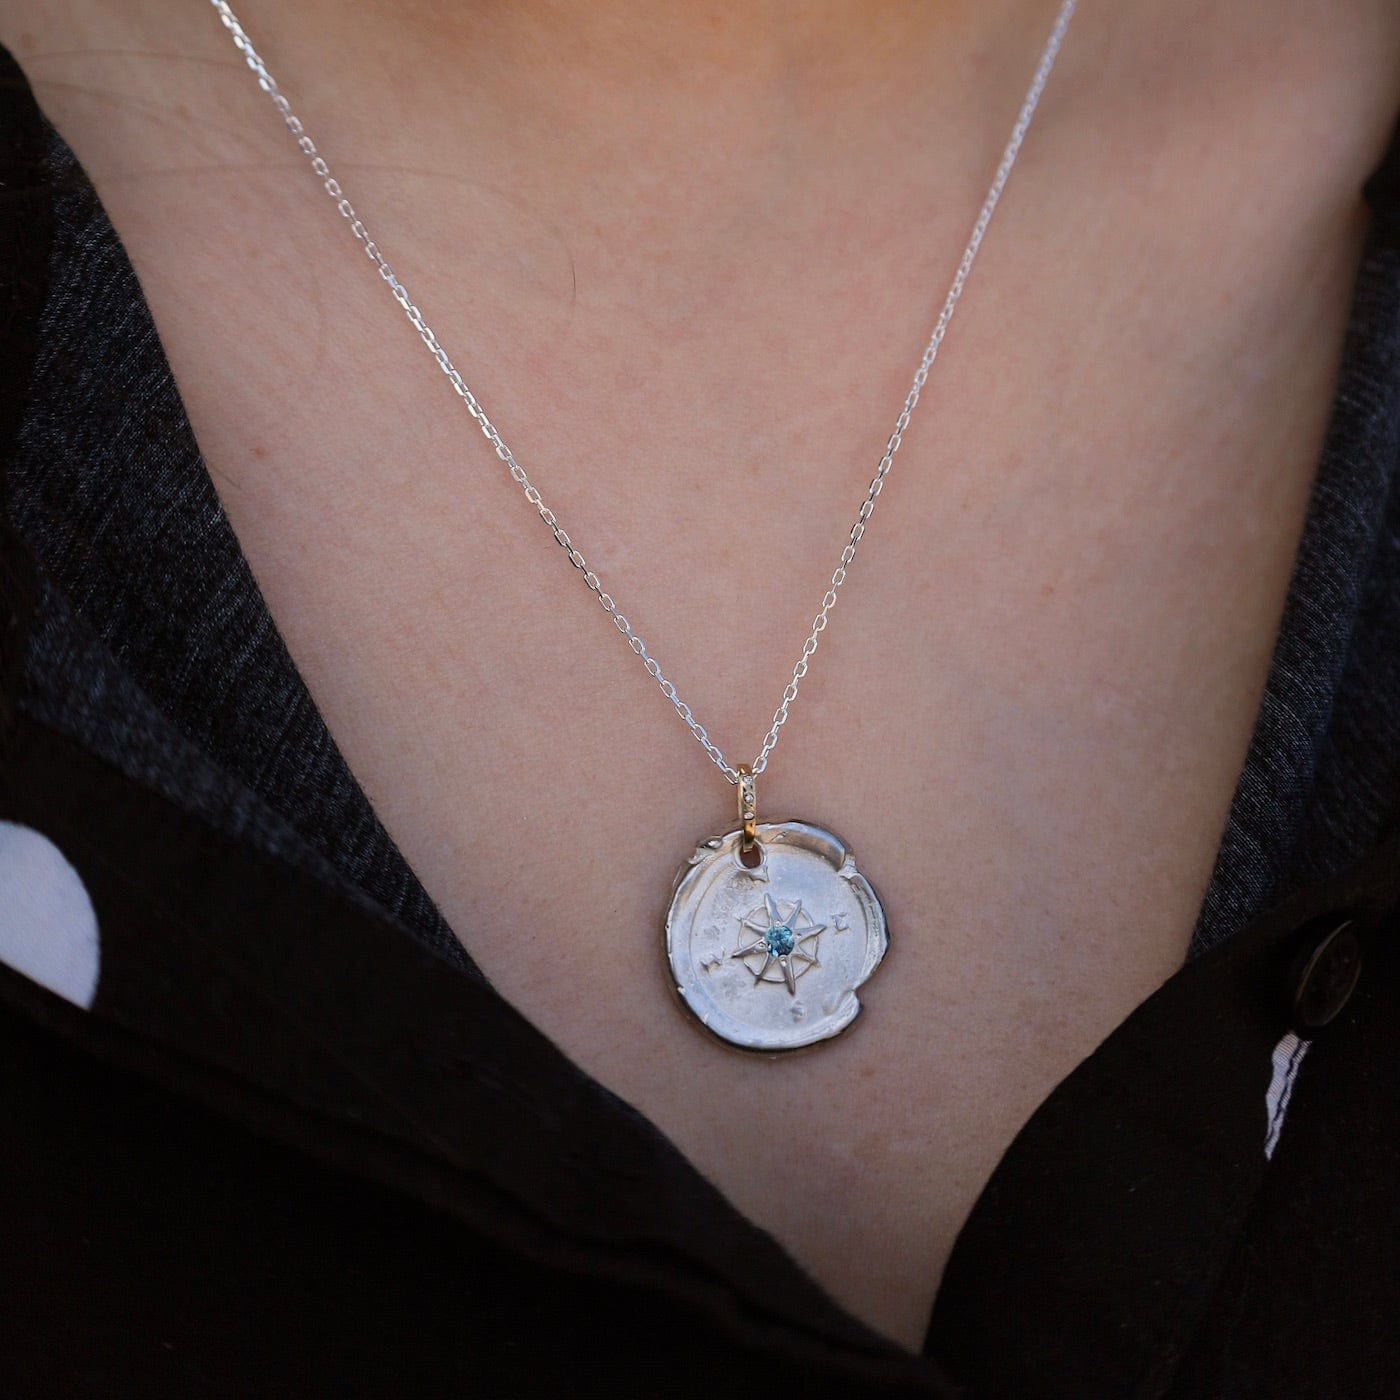 NKL-14K Sterling Silver & 14k Gold Compass Necklace with Montana Sapphire